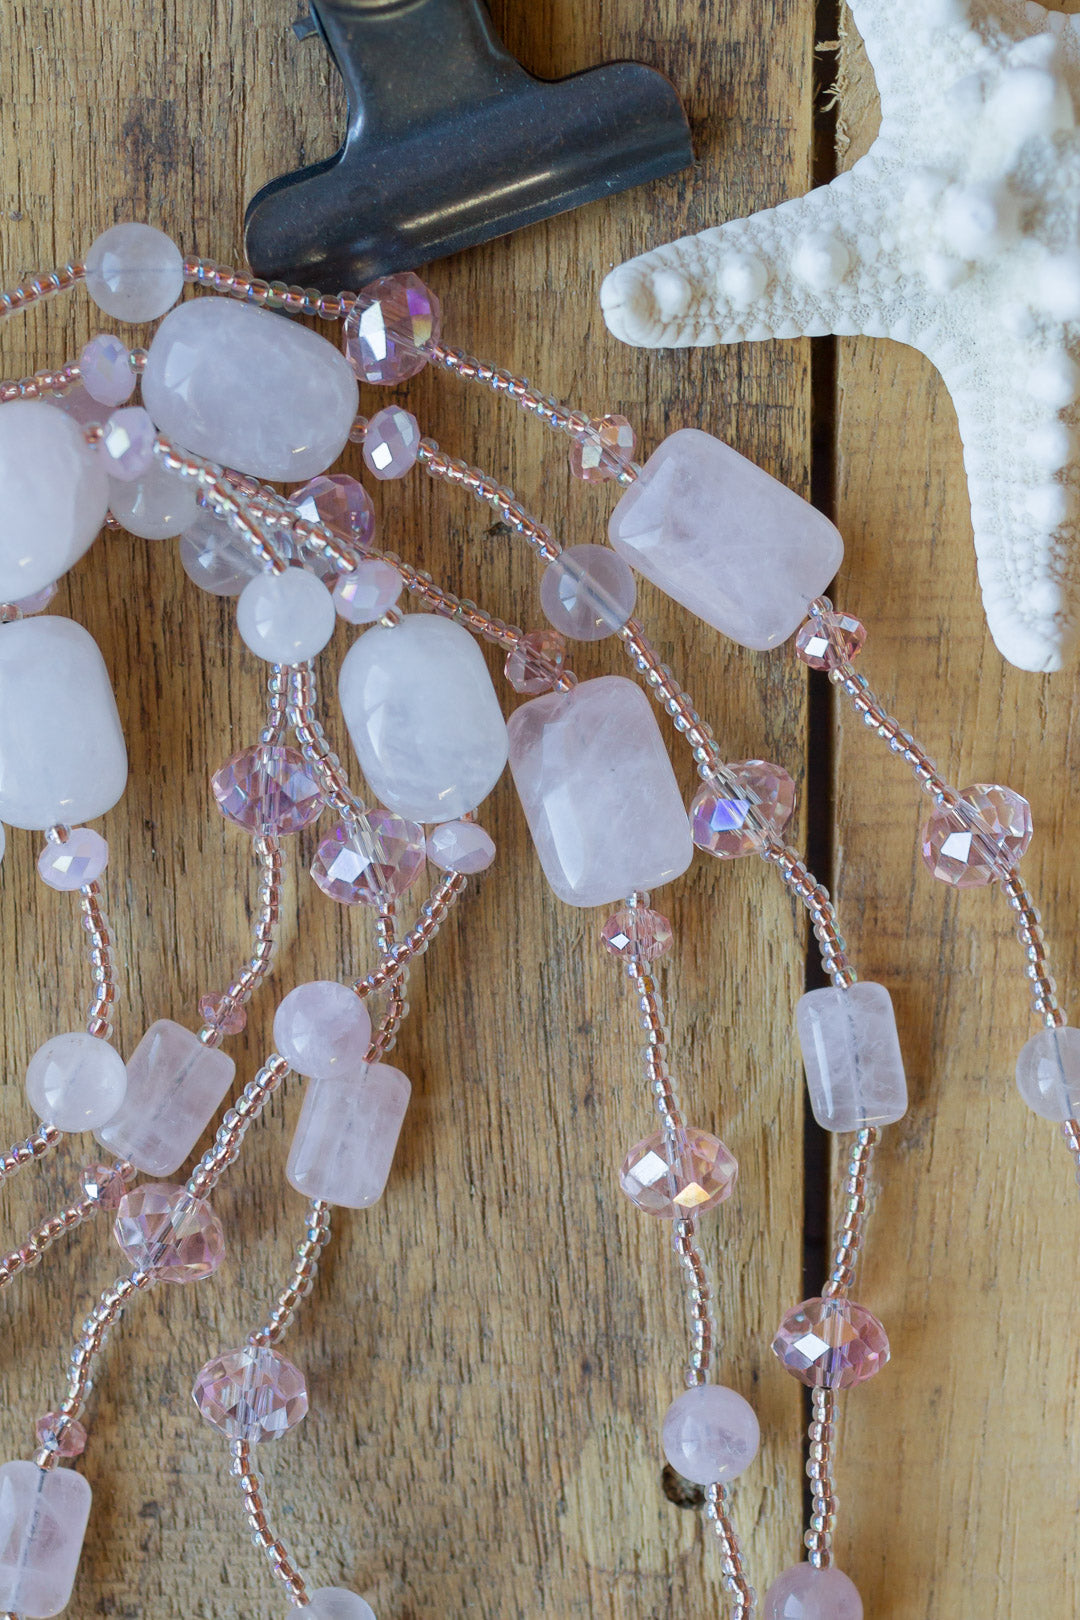 60" Extra Long Beaded Pale Pink Rose Quartz & Crystal Necklace - My Urban Gems